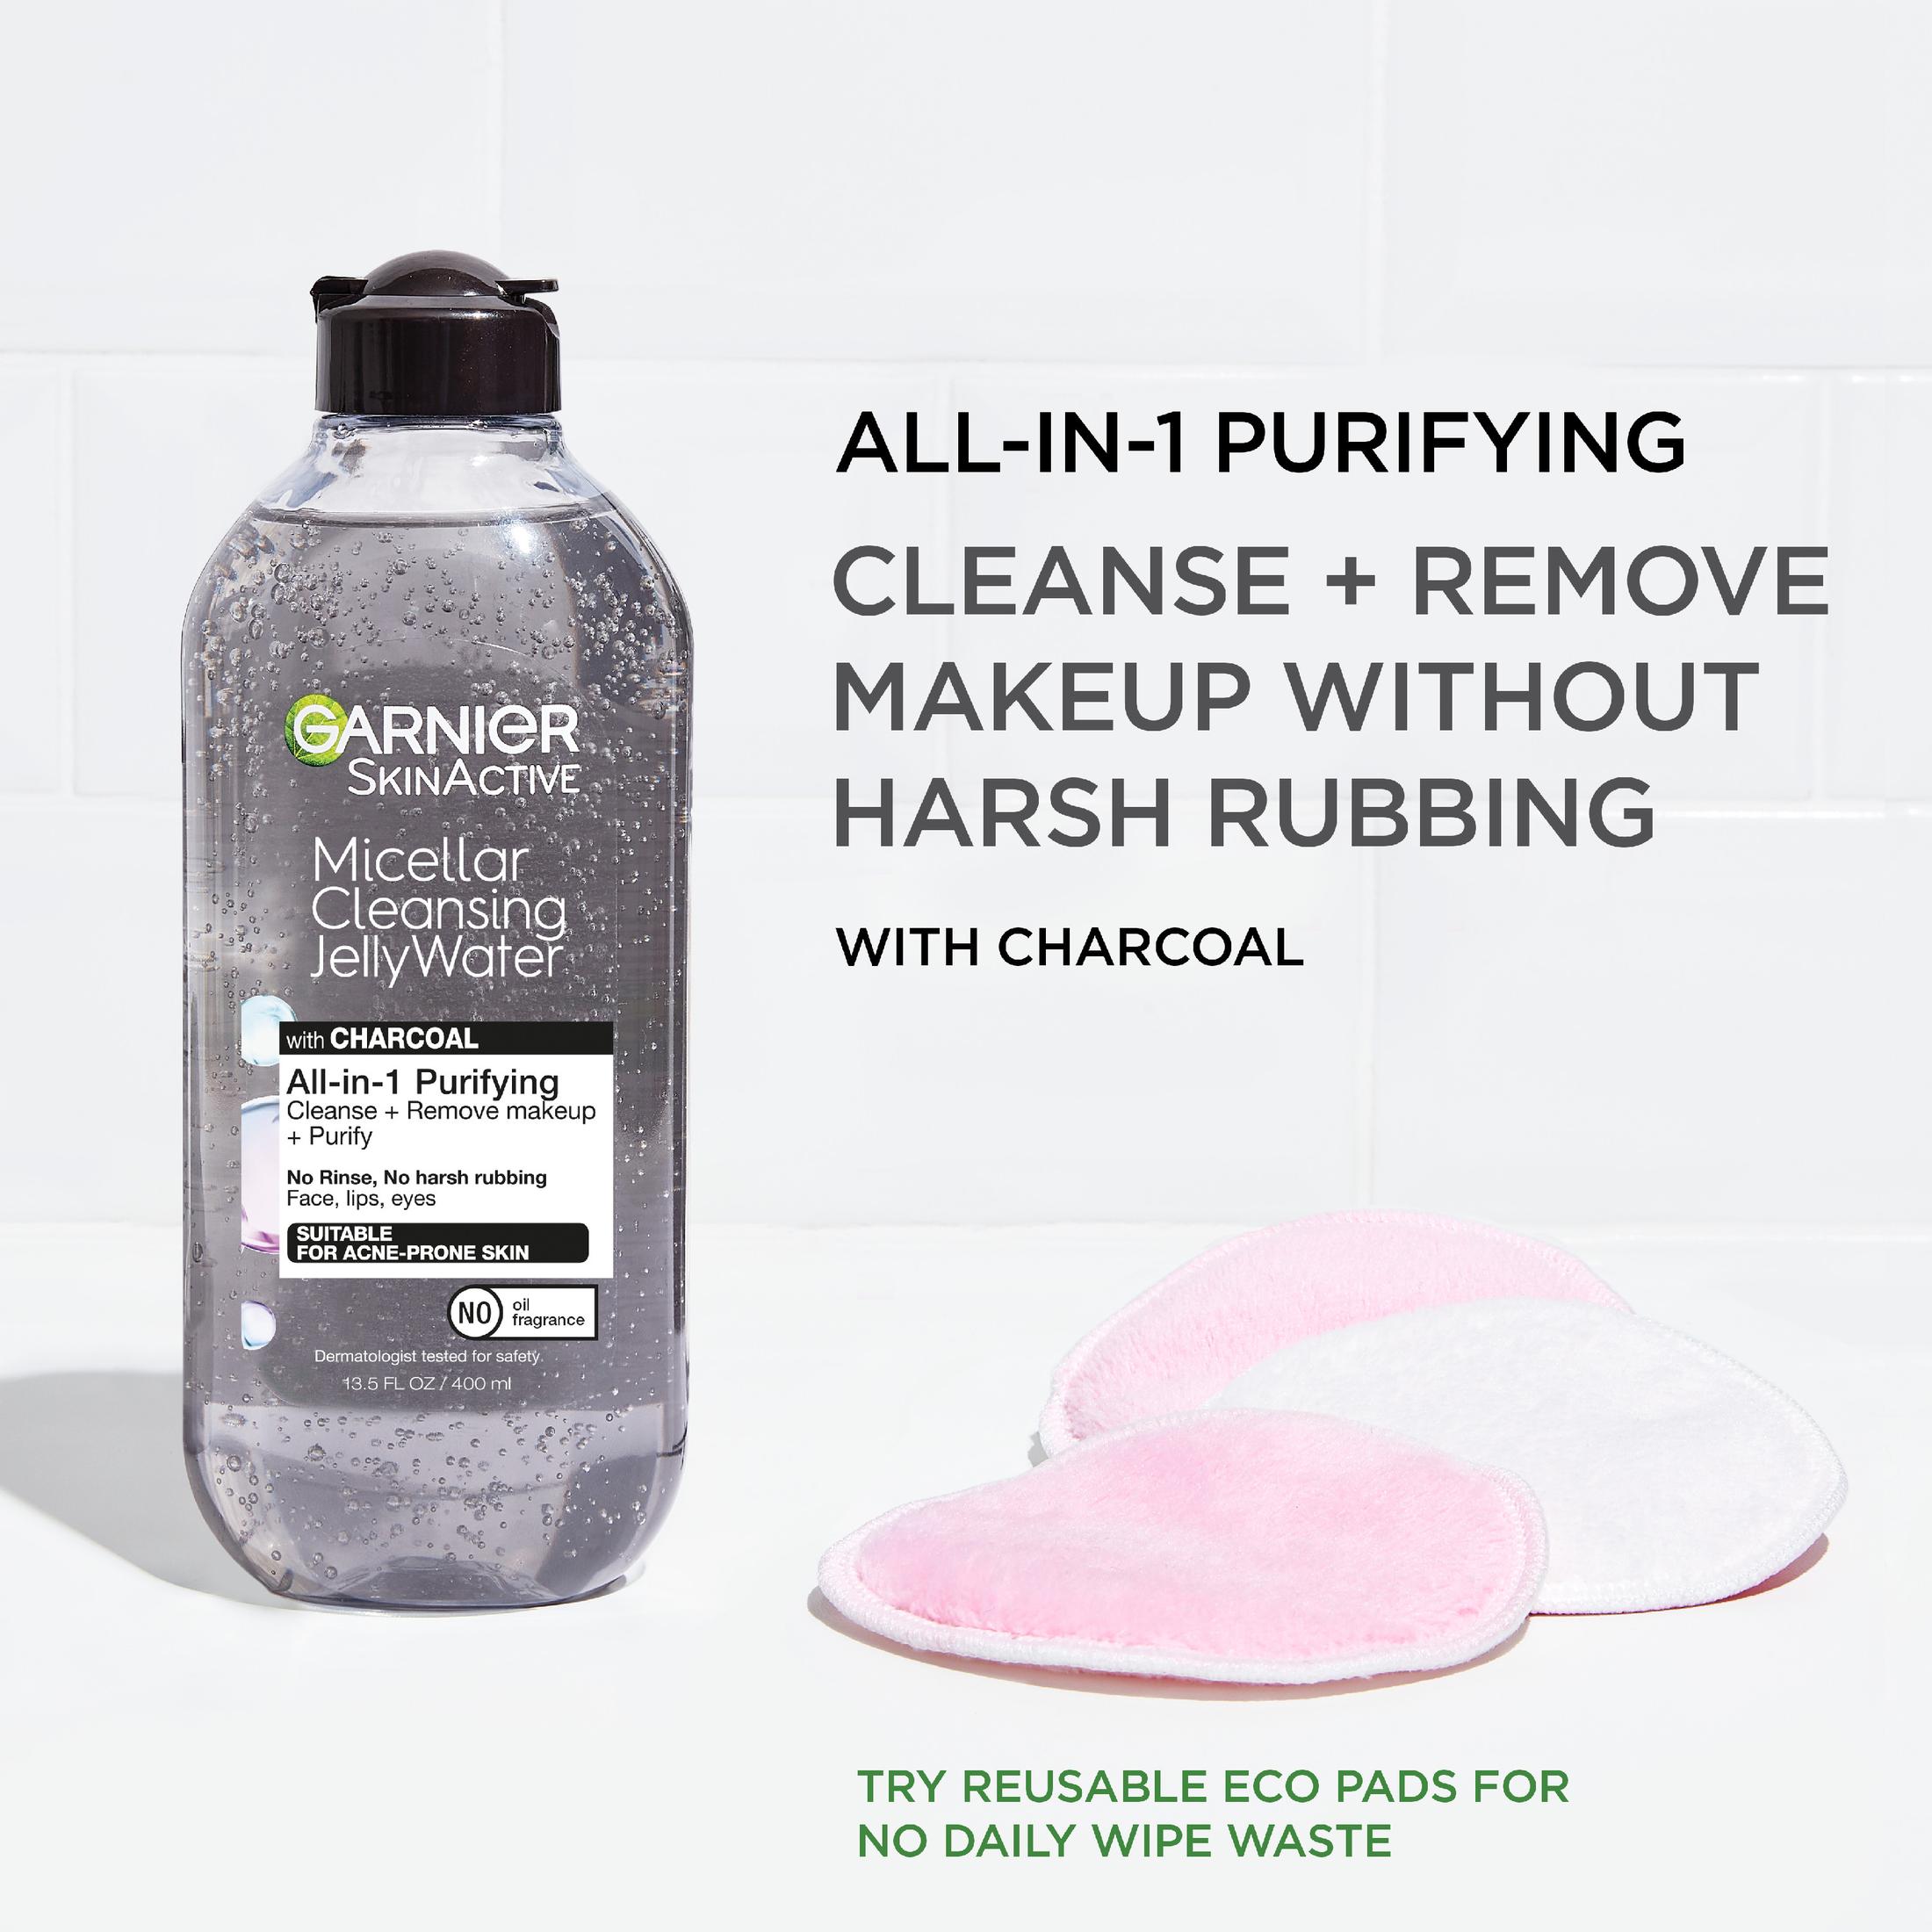 Garnier SkinActive Micellar Cleansing Jelly Water All in 1 Purifying, 13.5 fl oz - image 4 of 8